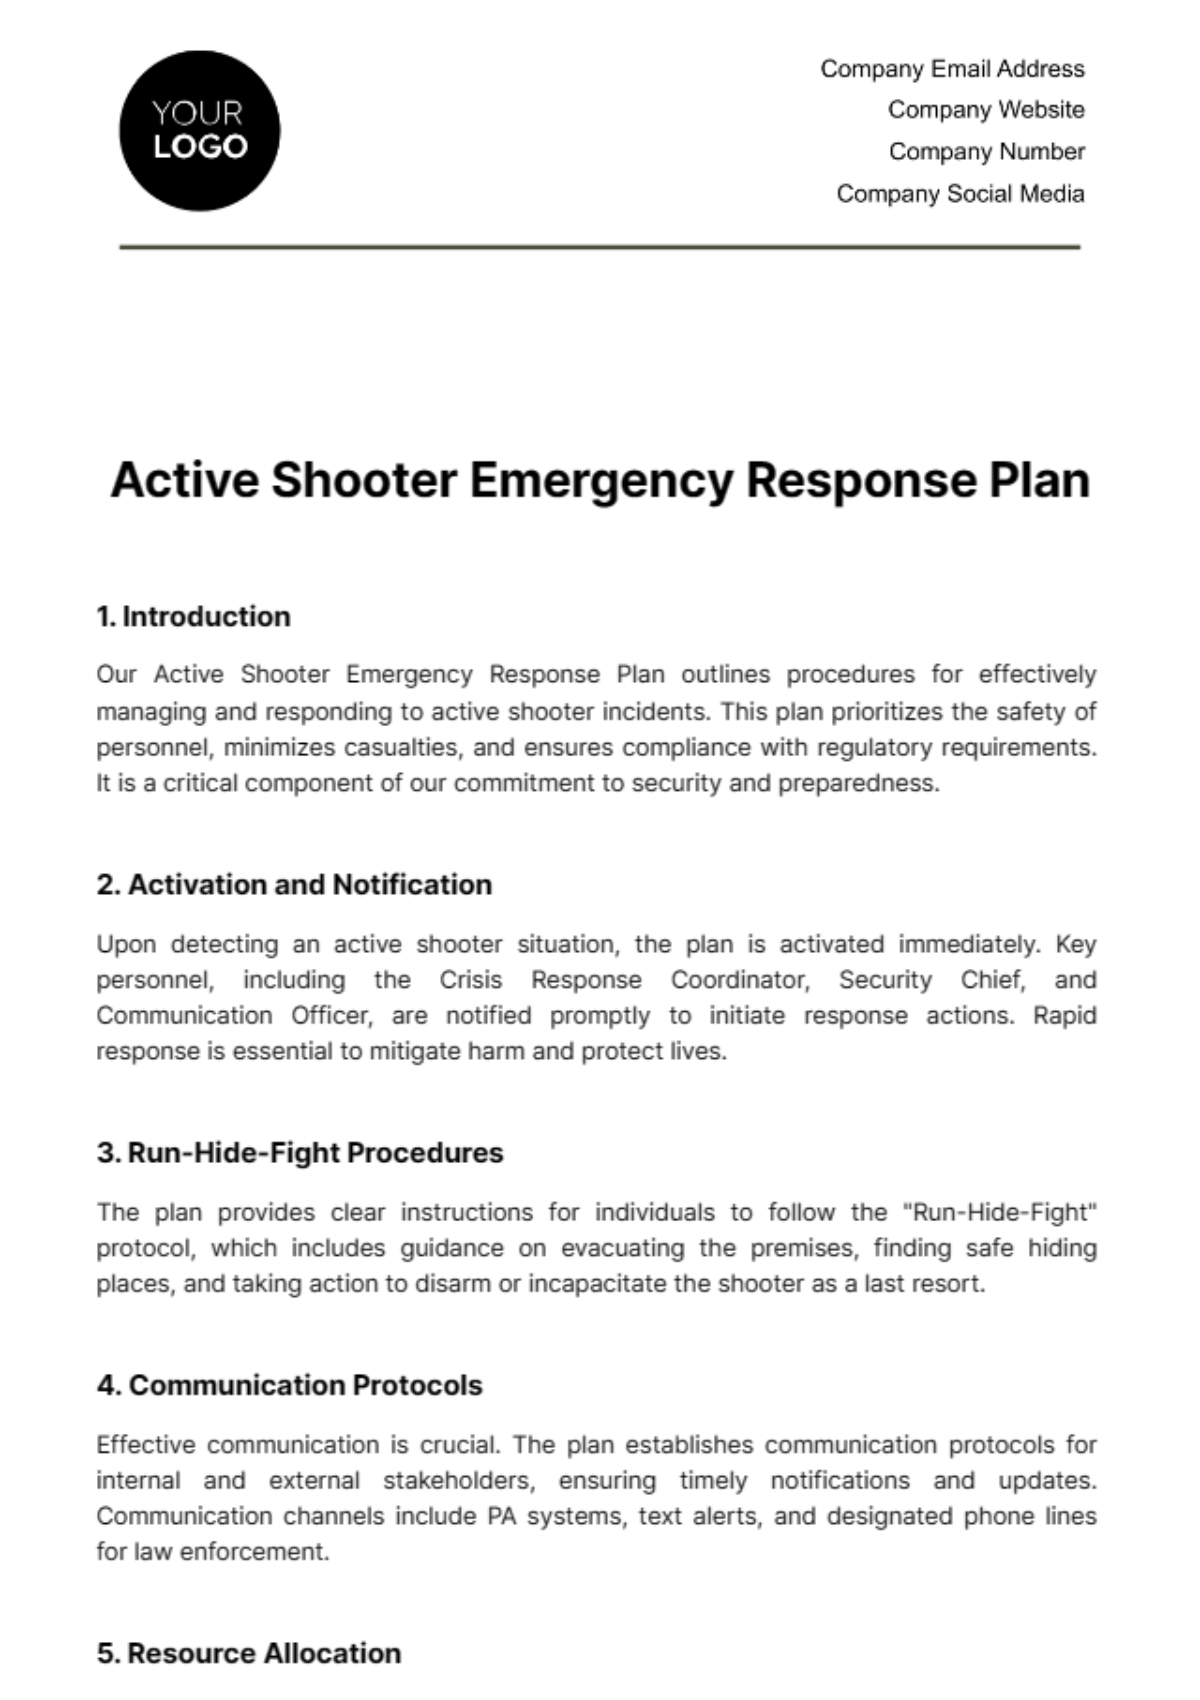 Active Shooter Emergency Response Plan Template